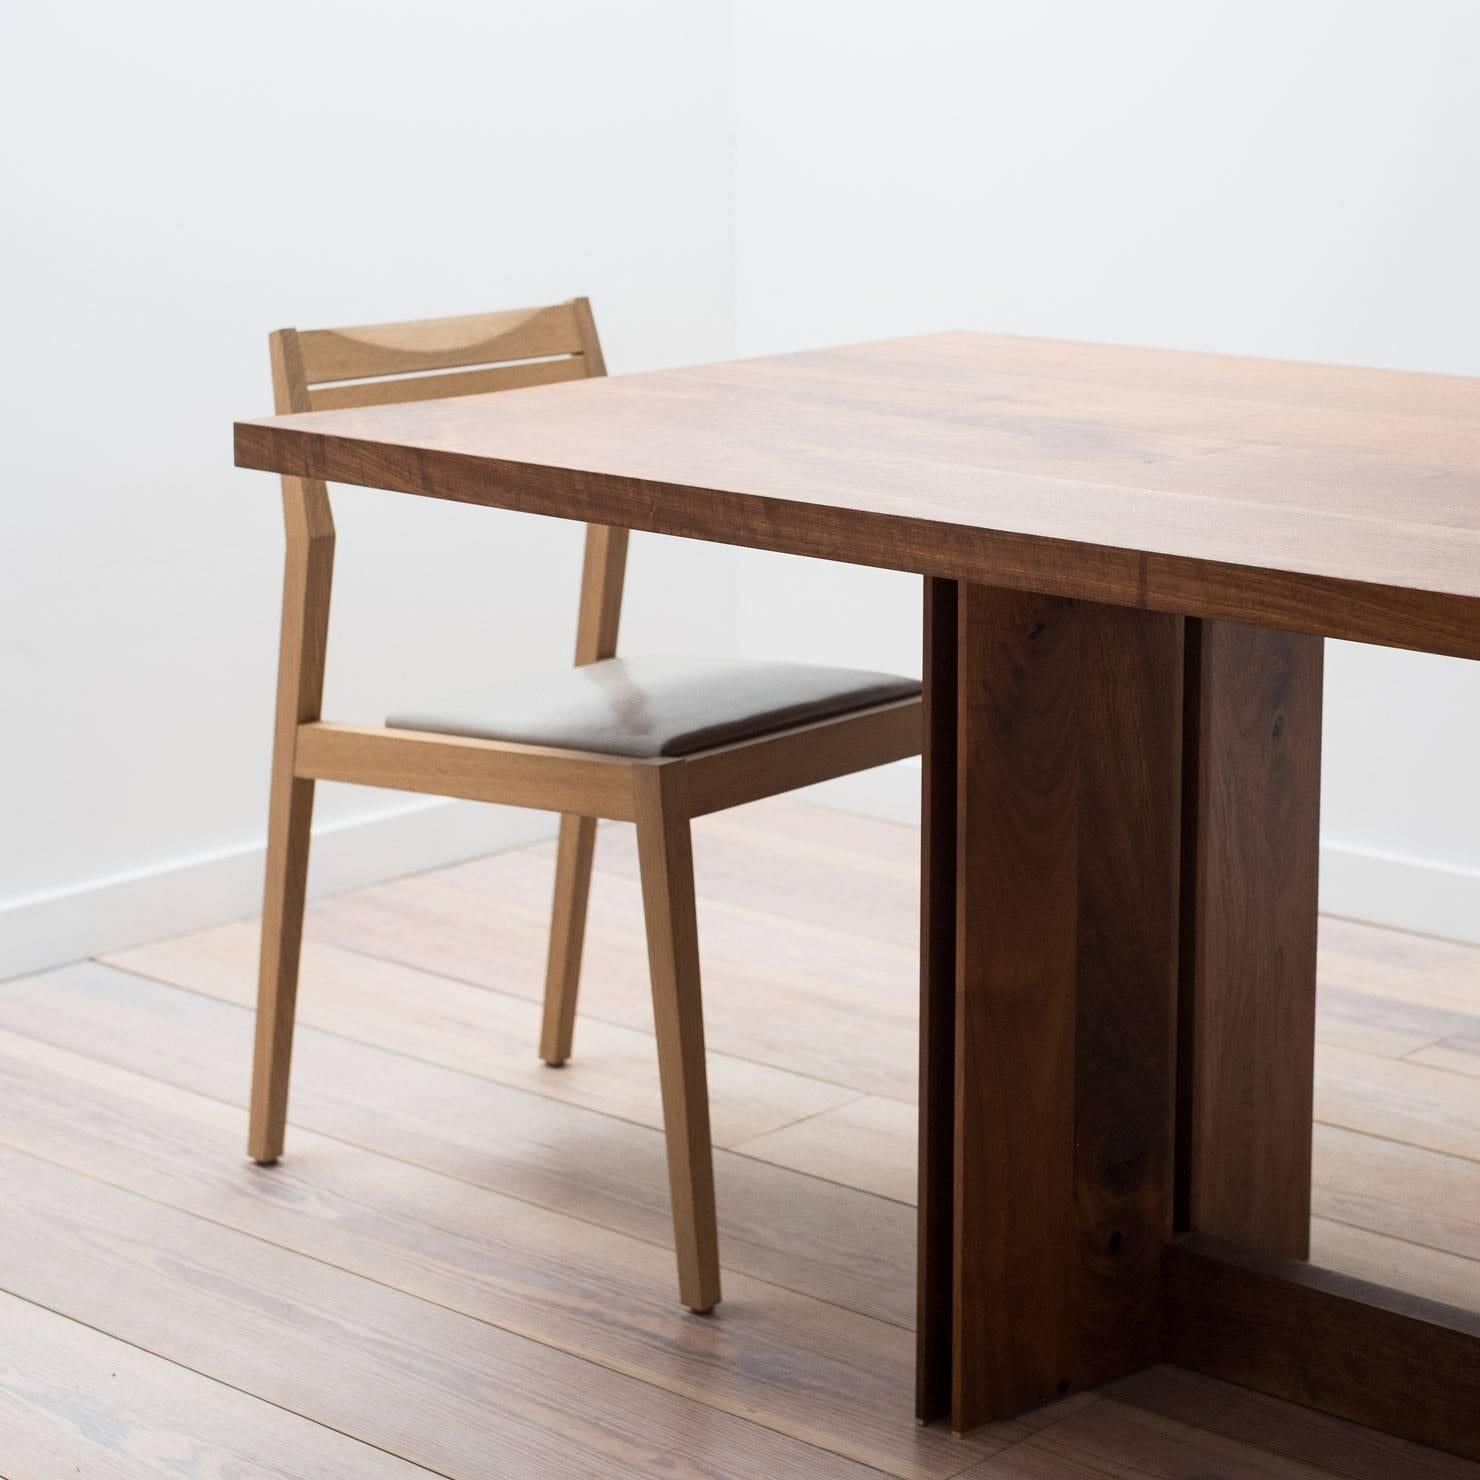 The Tapered Dining Table, made from solid black walnut, showcases the quality and beauty of each hand-selected board of wood. The base of this table pairs strikingly thin edges with negative space, creating a strong, yet light appearance. This piece